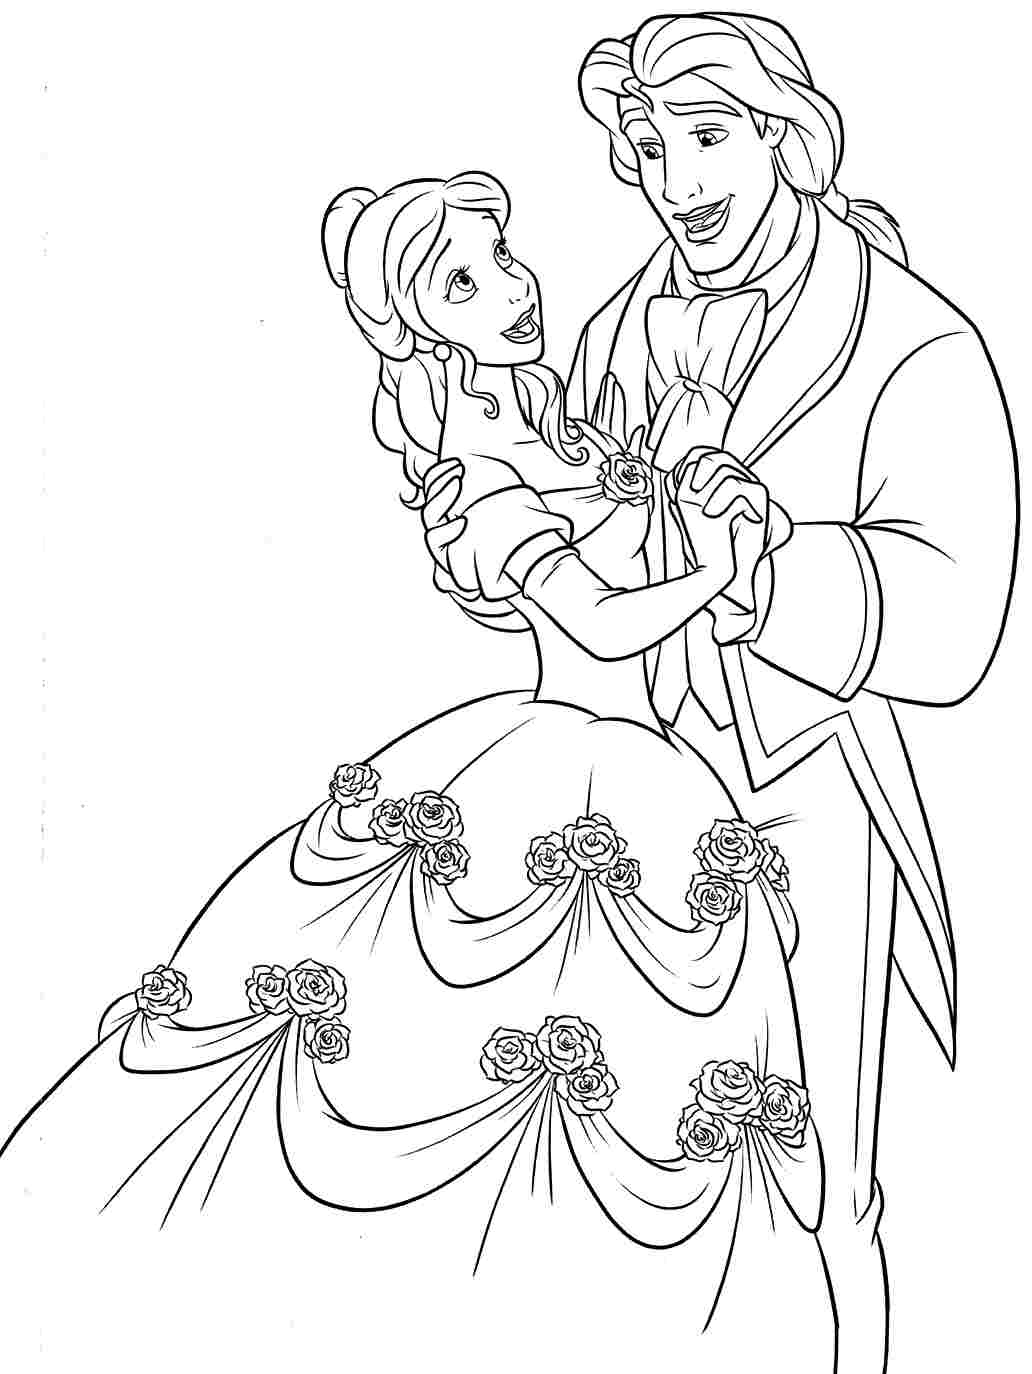 Drawings The Beauty And The Beast Animation Movies Page 4 Printable Coloring Pages